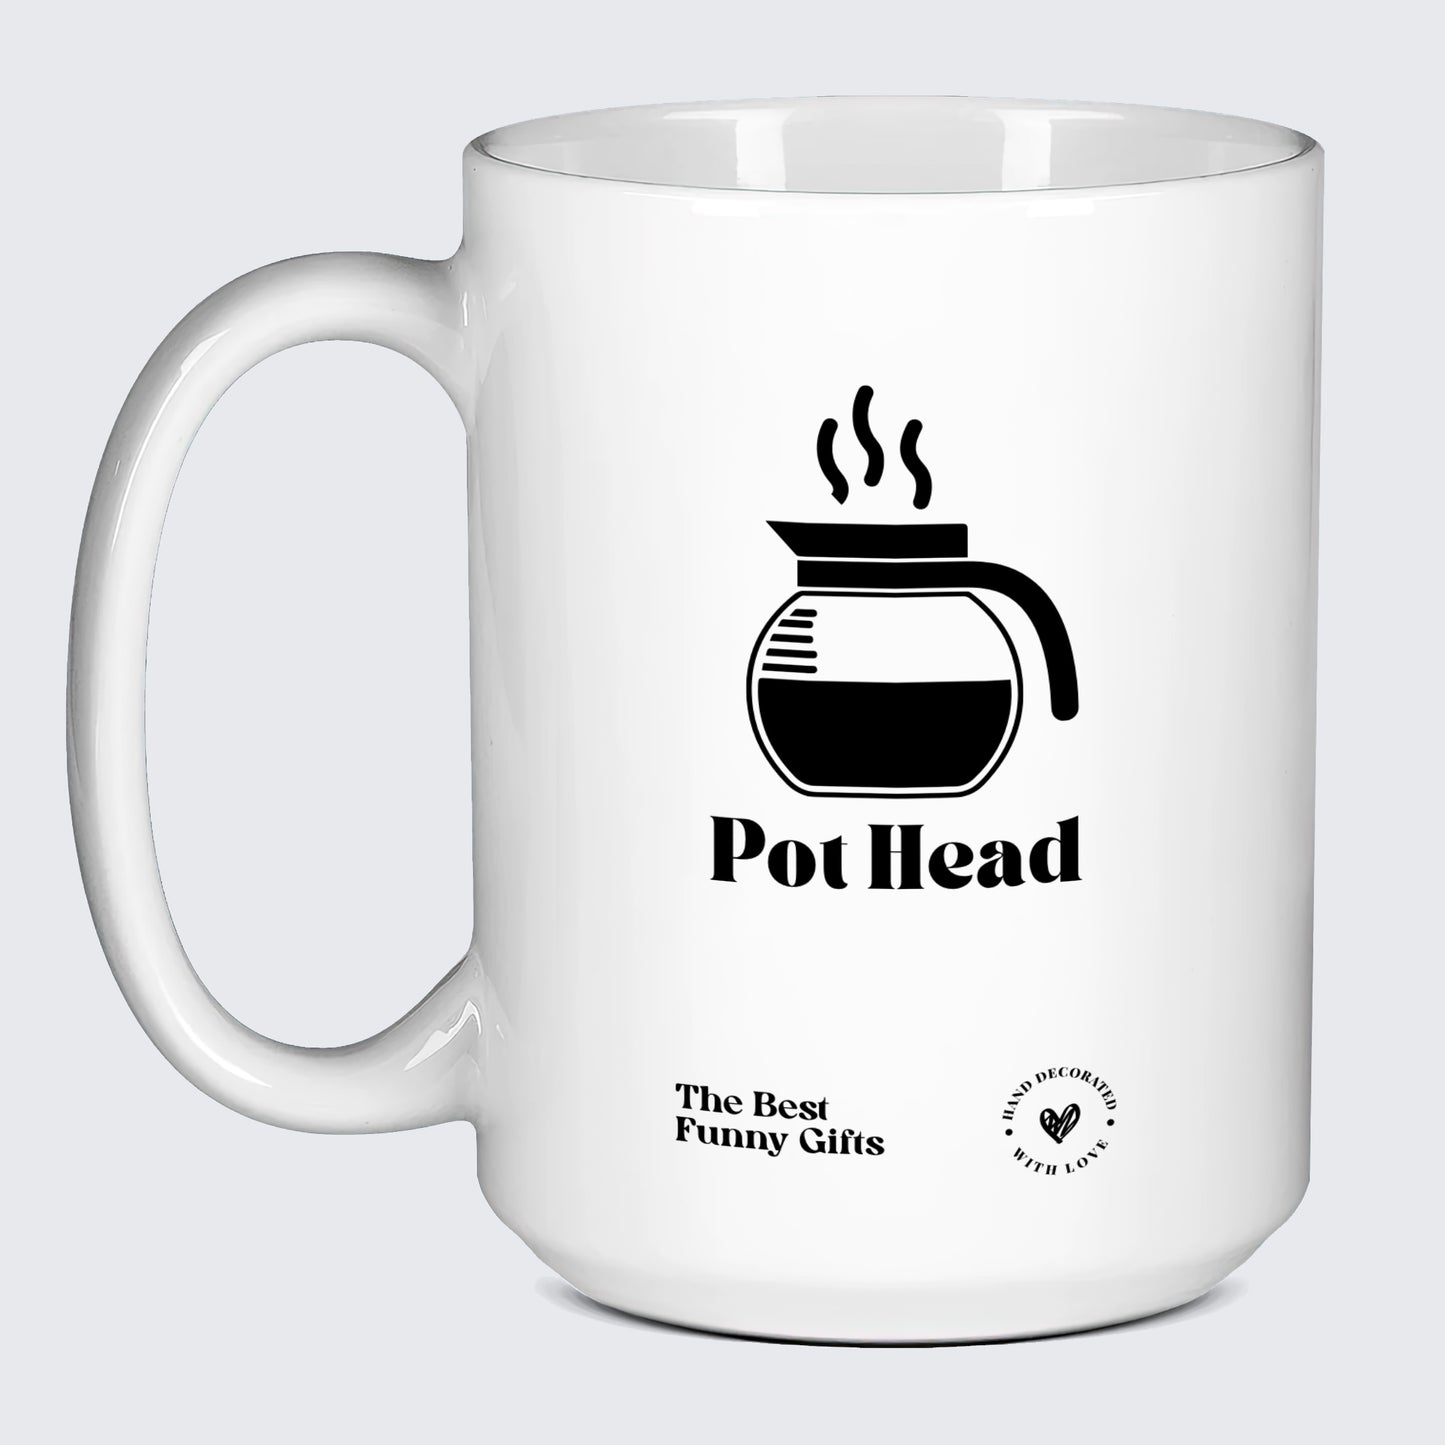 Unique Coffee Mugs Pot Head - The Best Funny Gifts